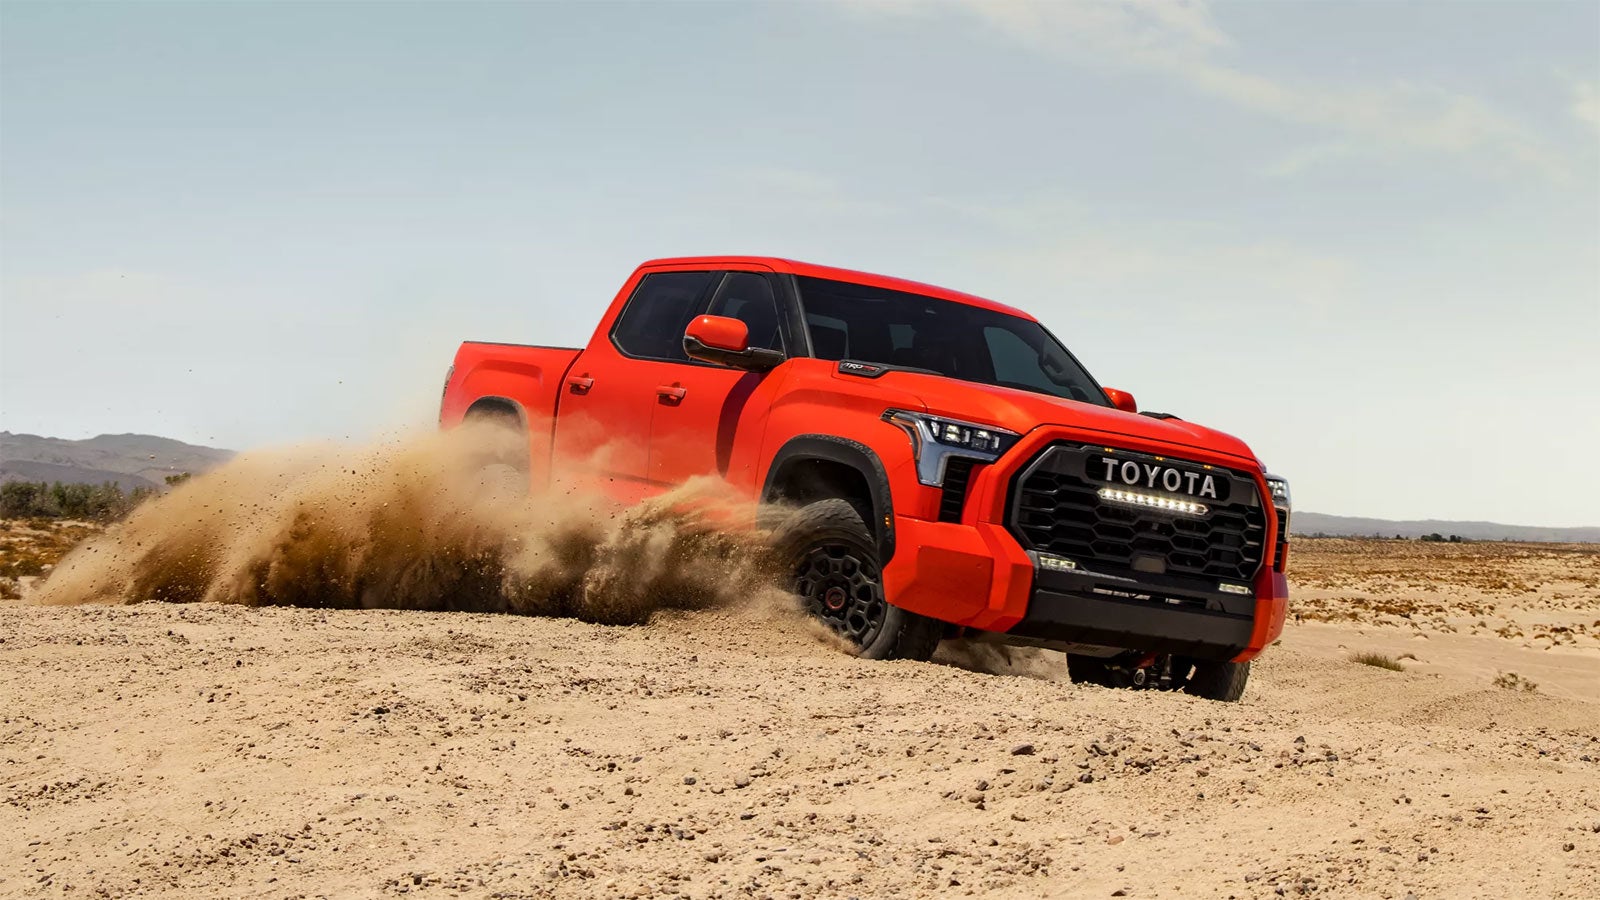 2022 Toyota Tundra Gallery | Sunrise Toyota North in Middle Island NY